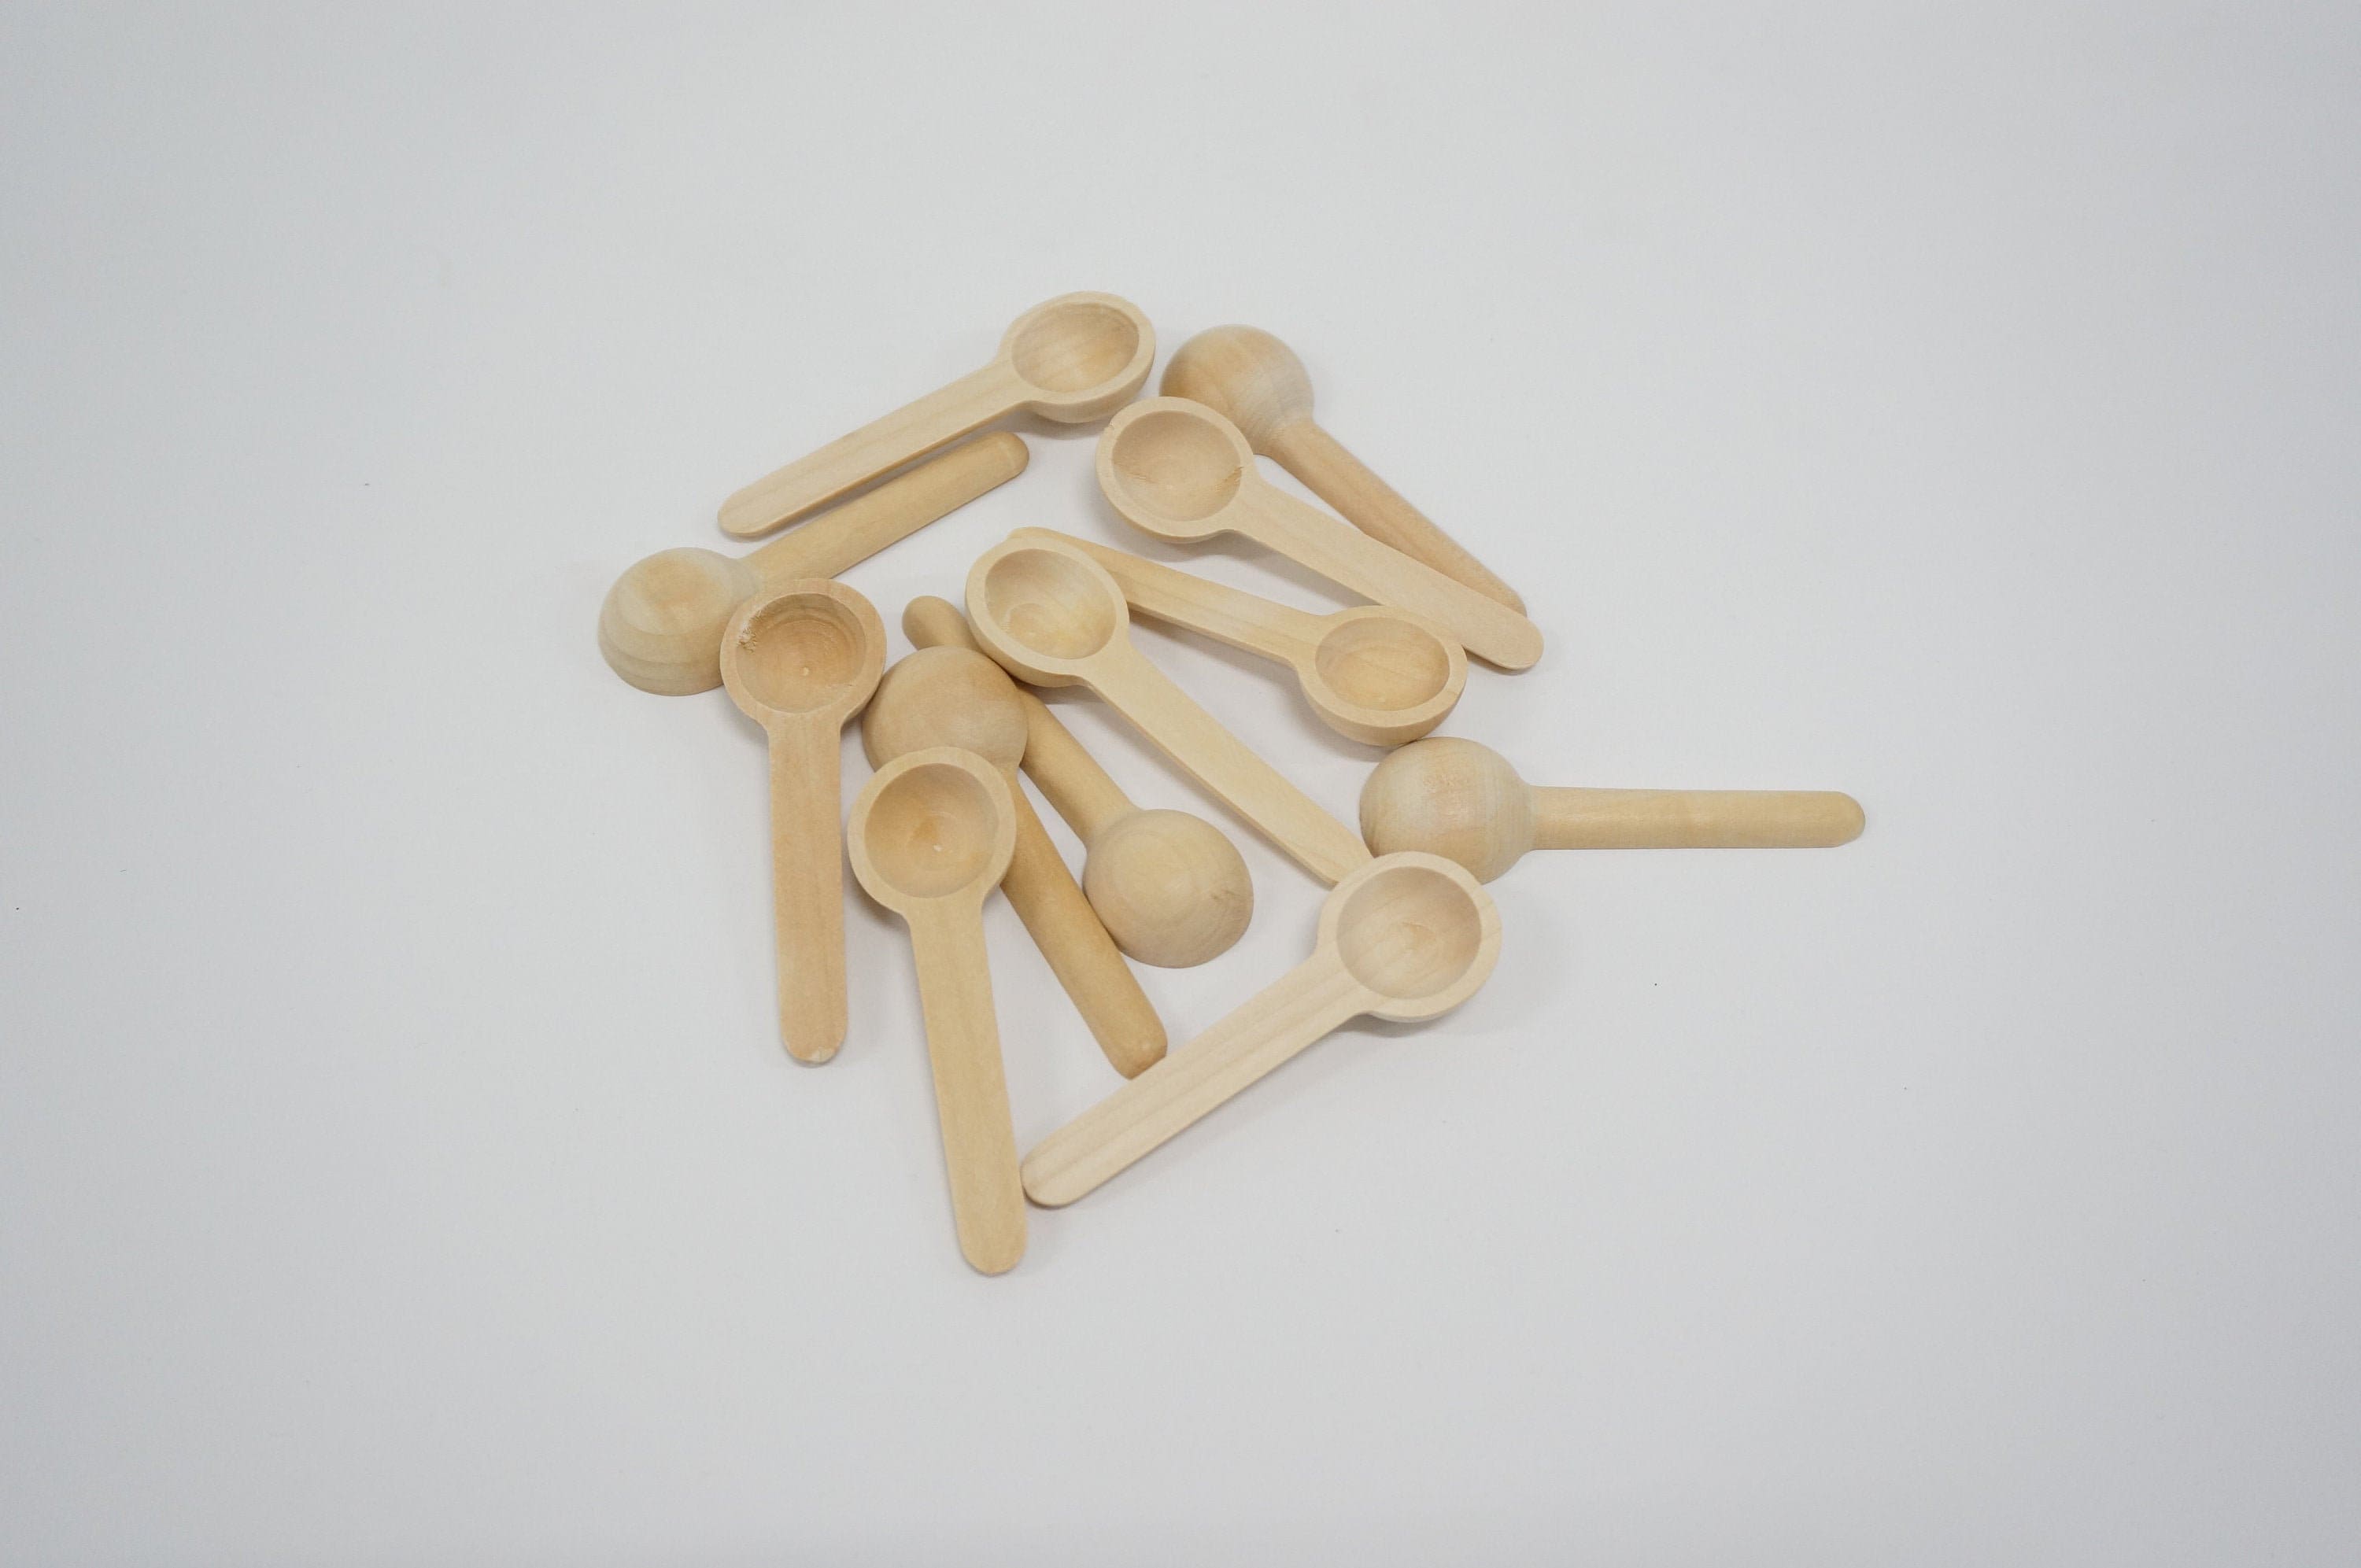 Mini wooden spoon - Small spice spoon - Lady Dee´s Traumgarne Export